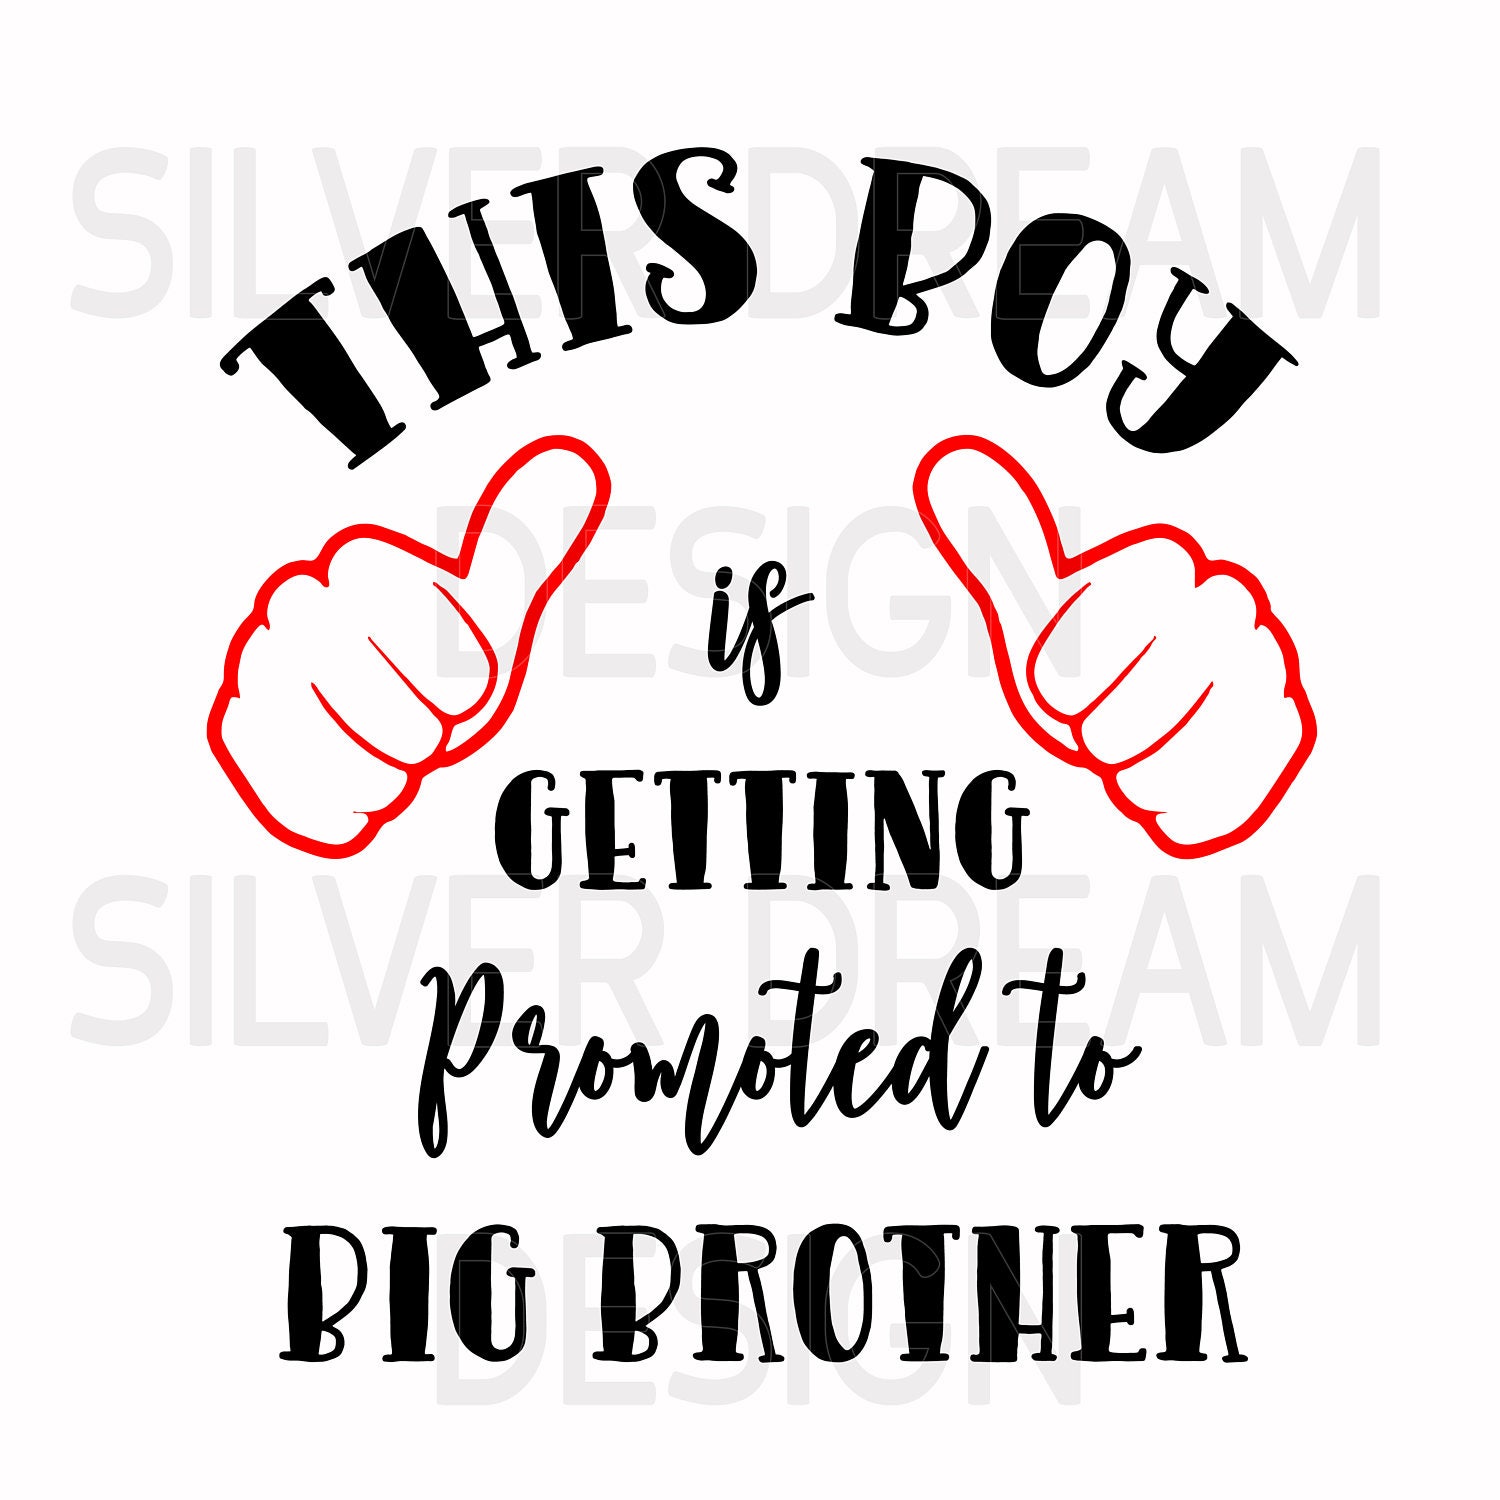 Download Promoted To Big Brother Svg Free / Promoted to Big Brother ...